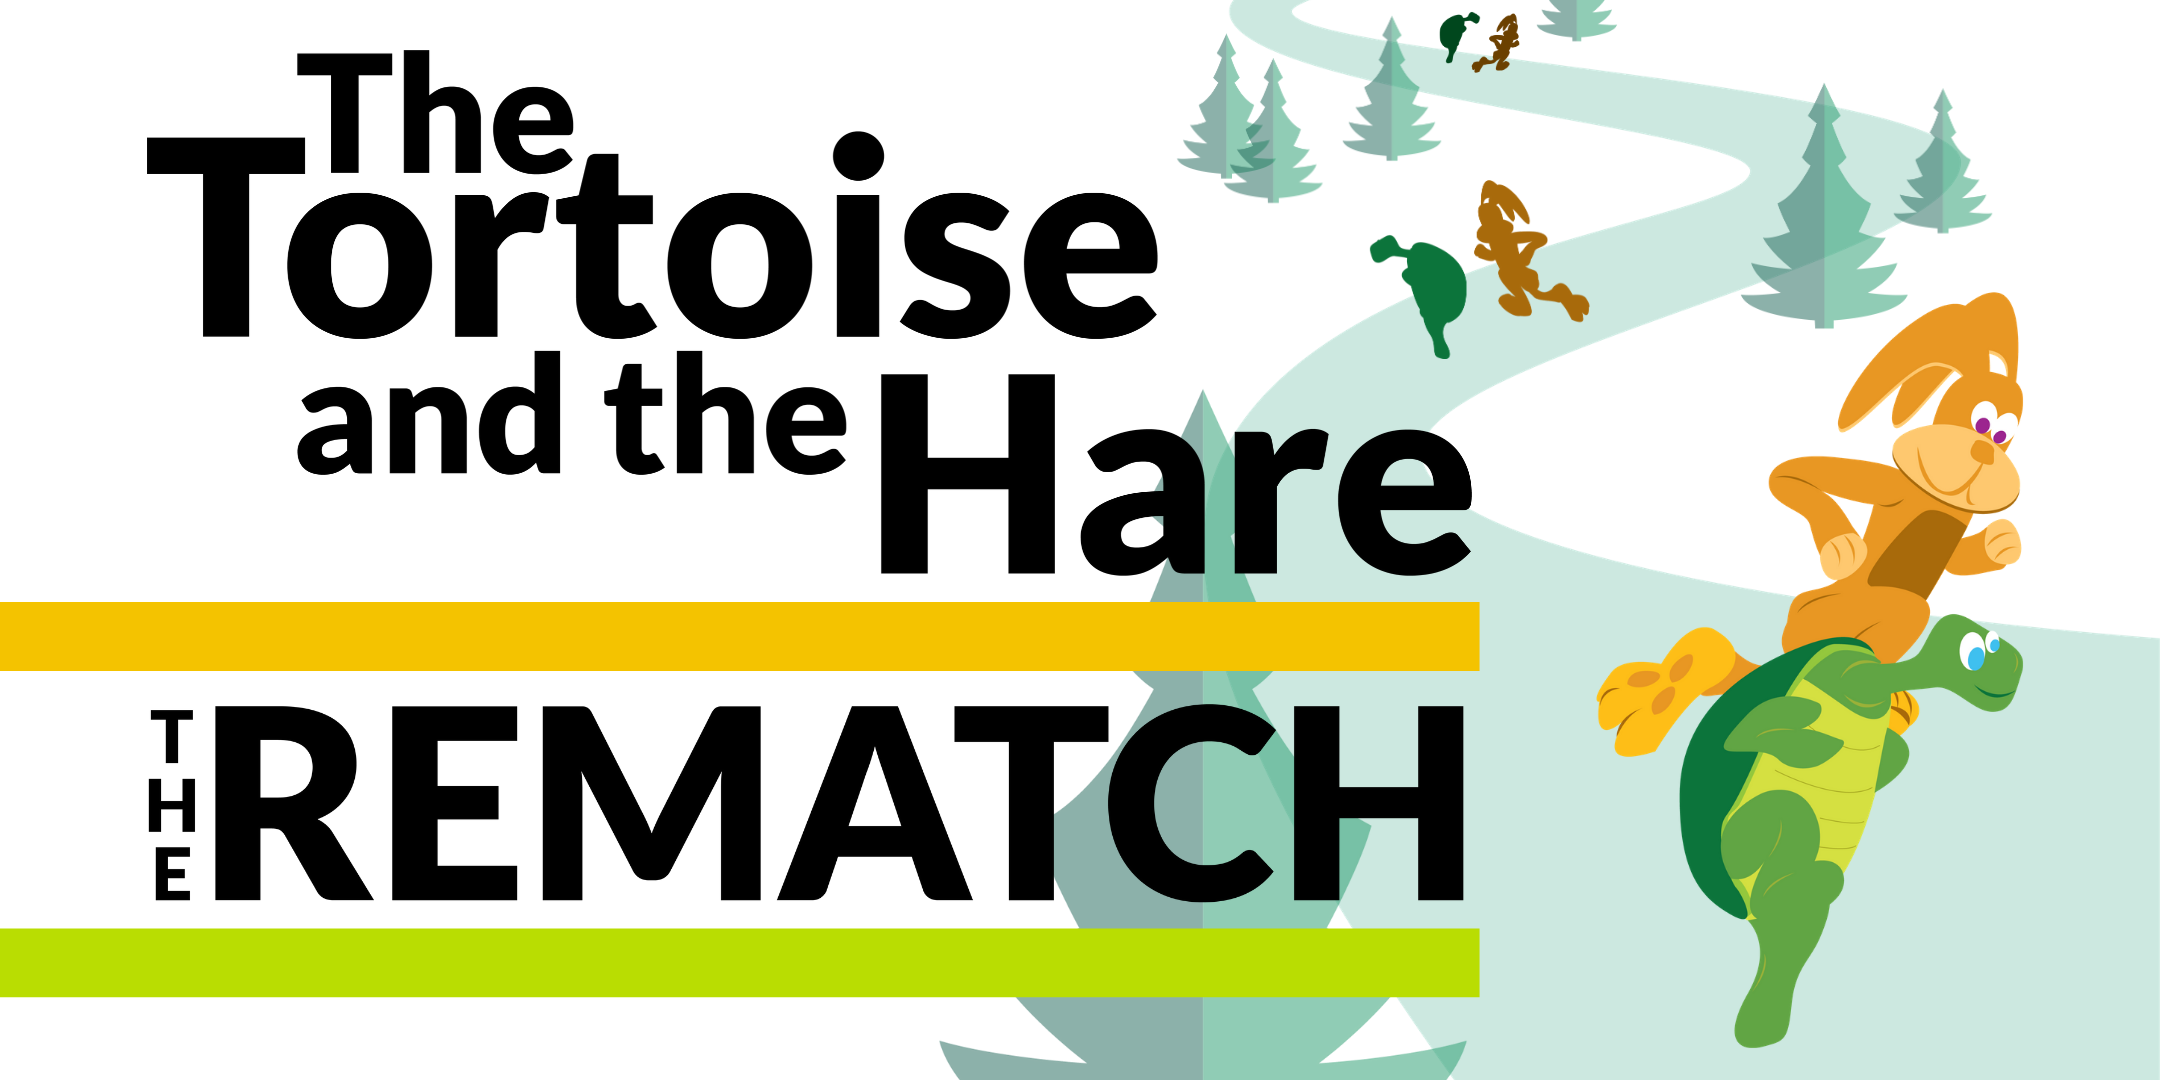 The Tortoise and the Hare: The Rematch